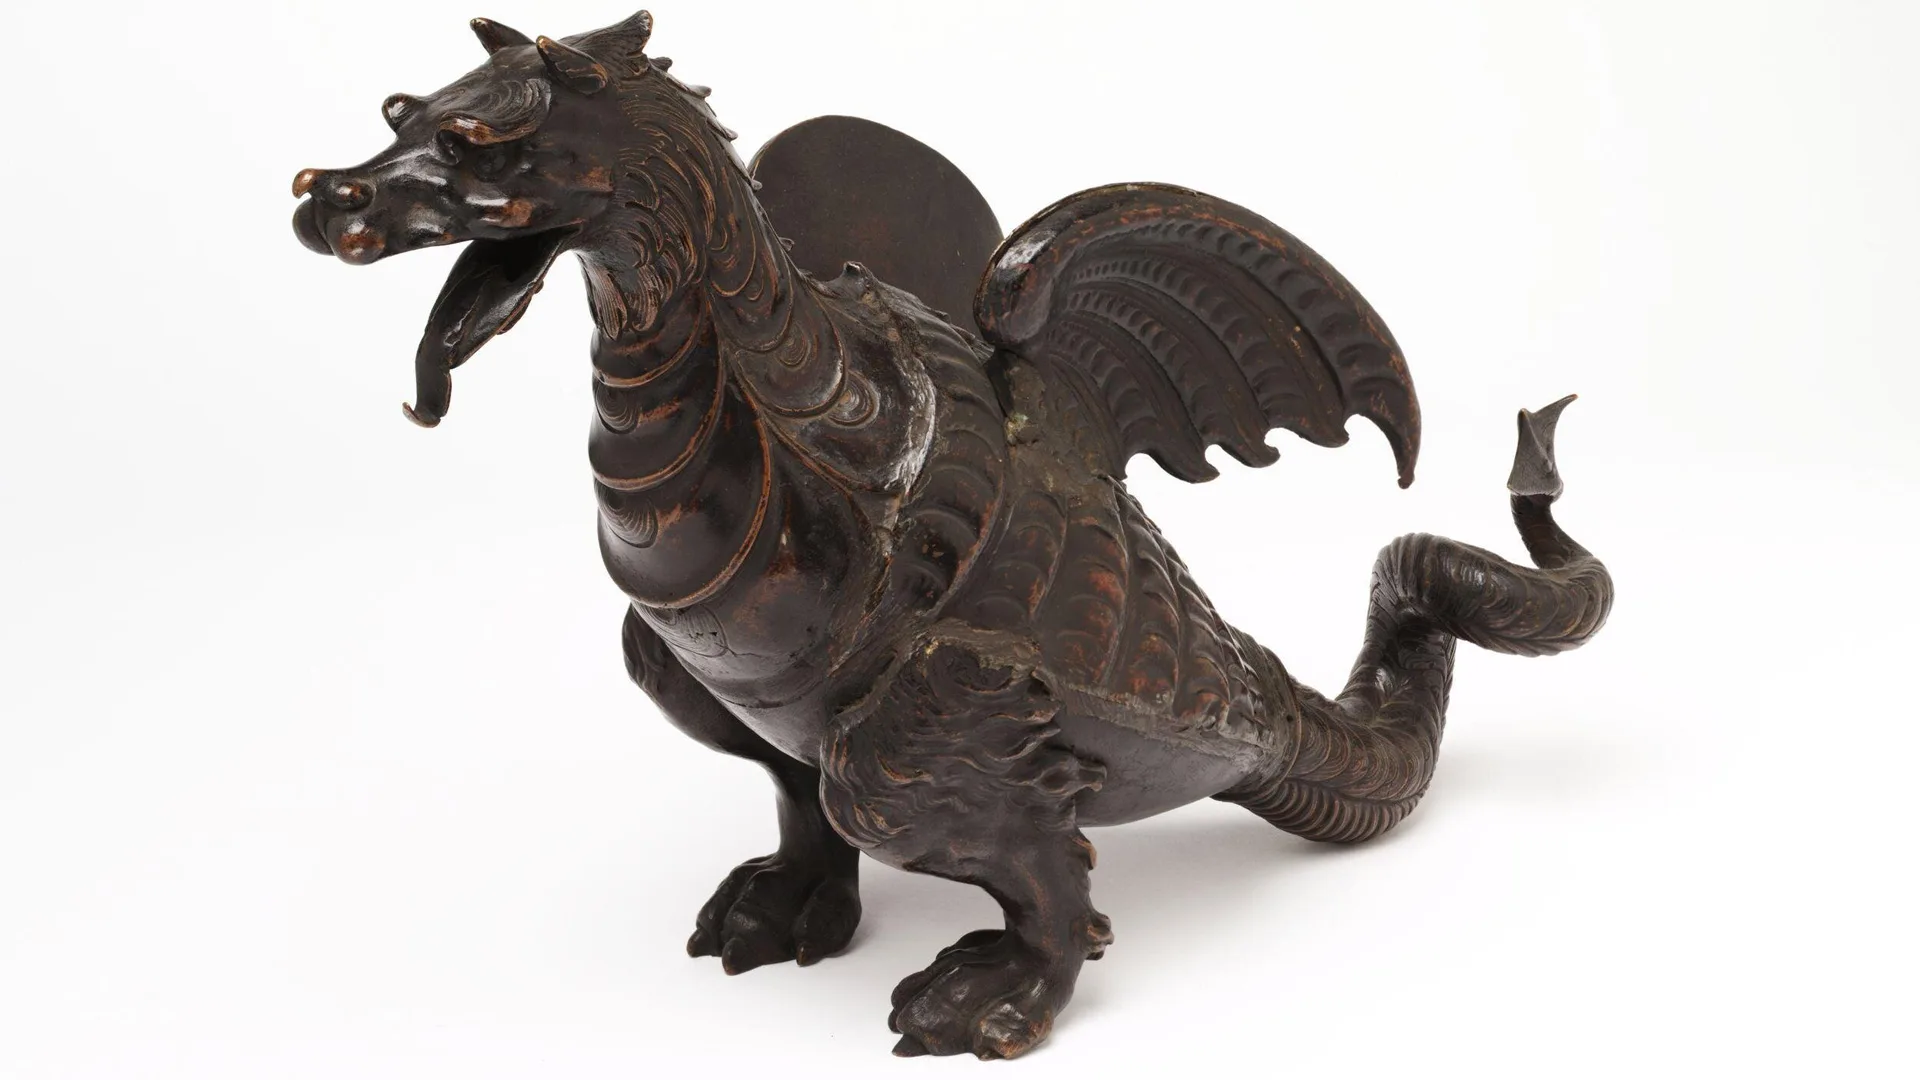 Photograph of a bronze winged dragon statue